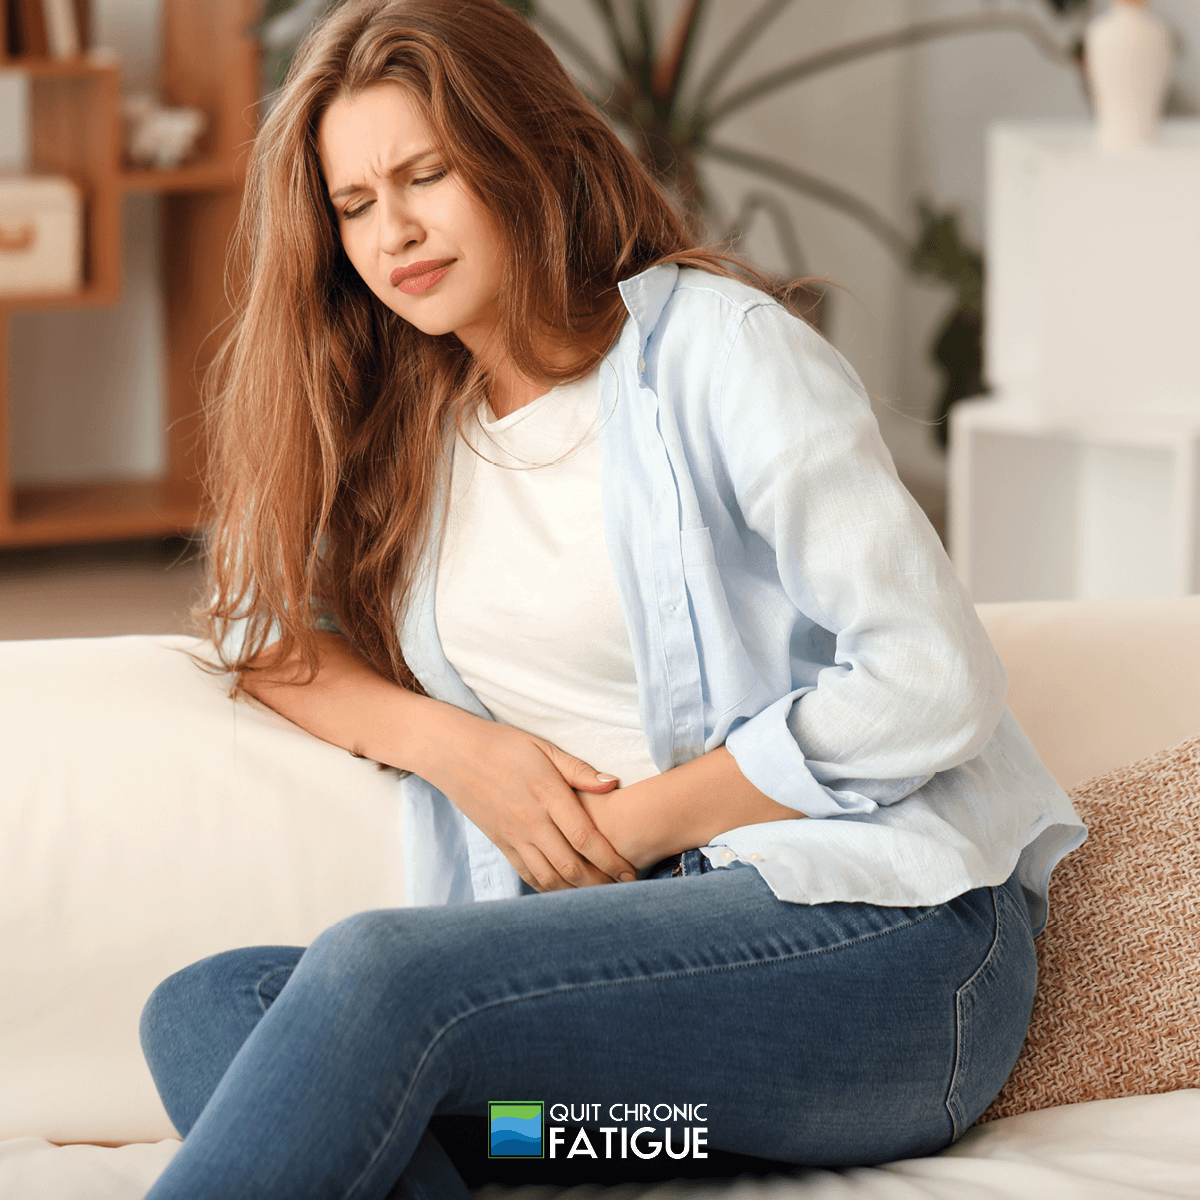 5-Unhealthy-Gut-Symptoms-That-May-Be-Causing-Other-Health-Issues